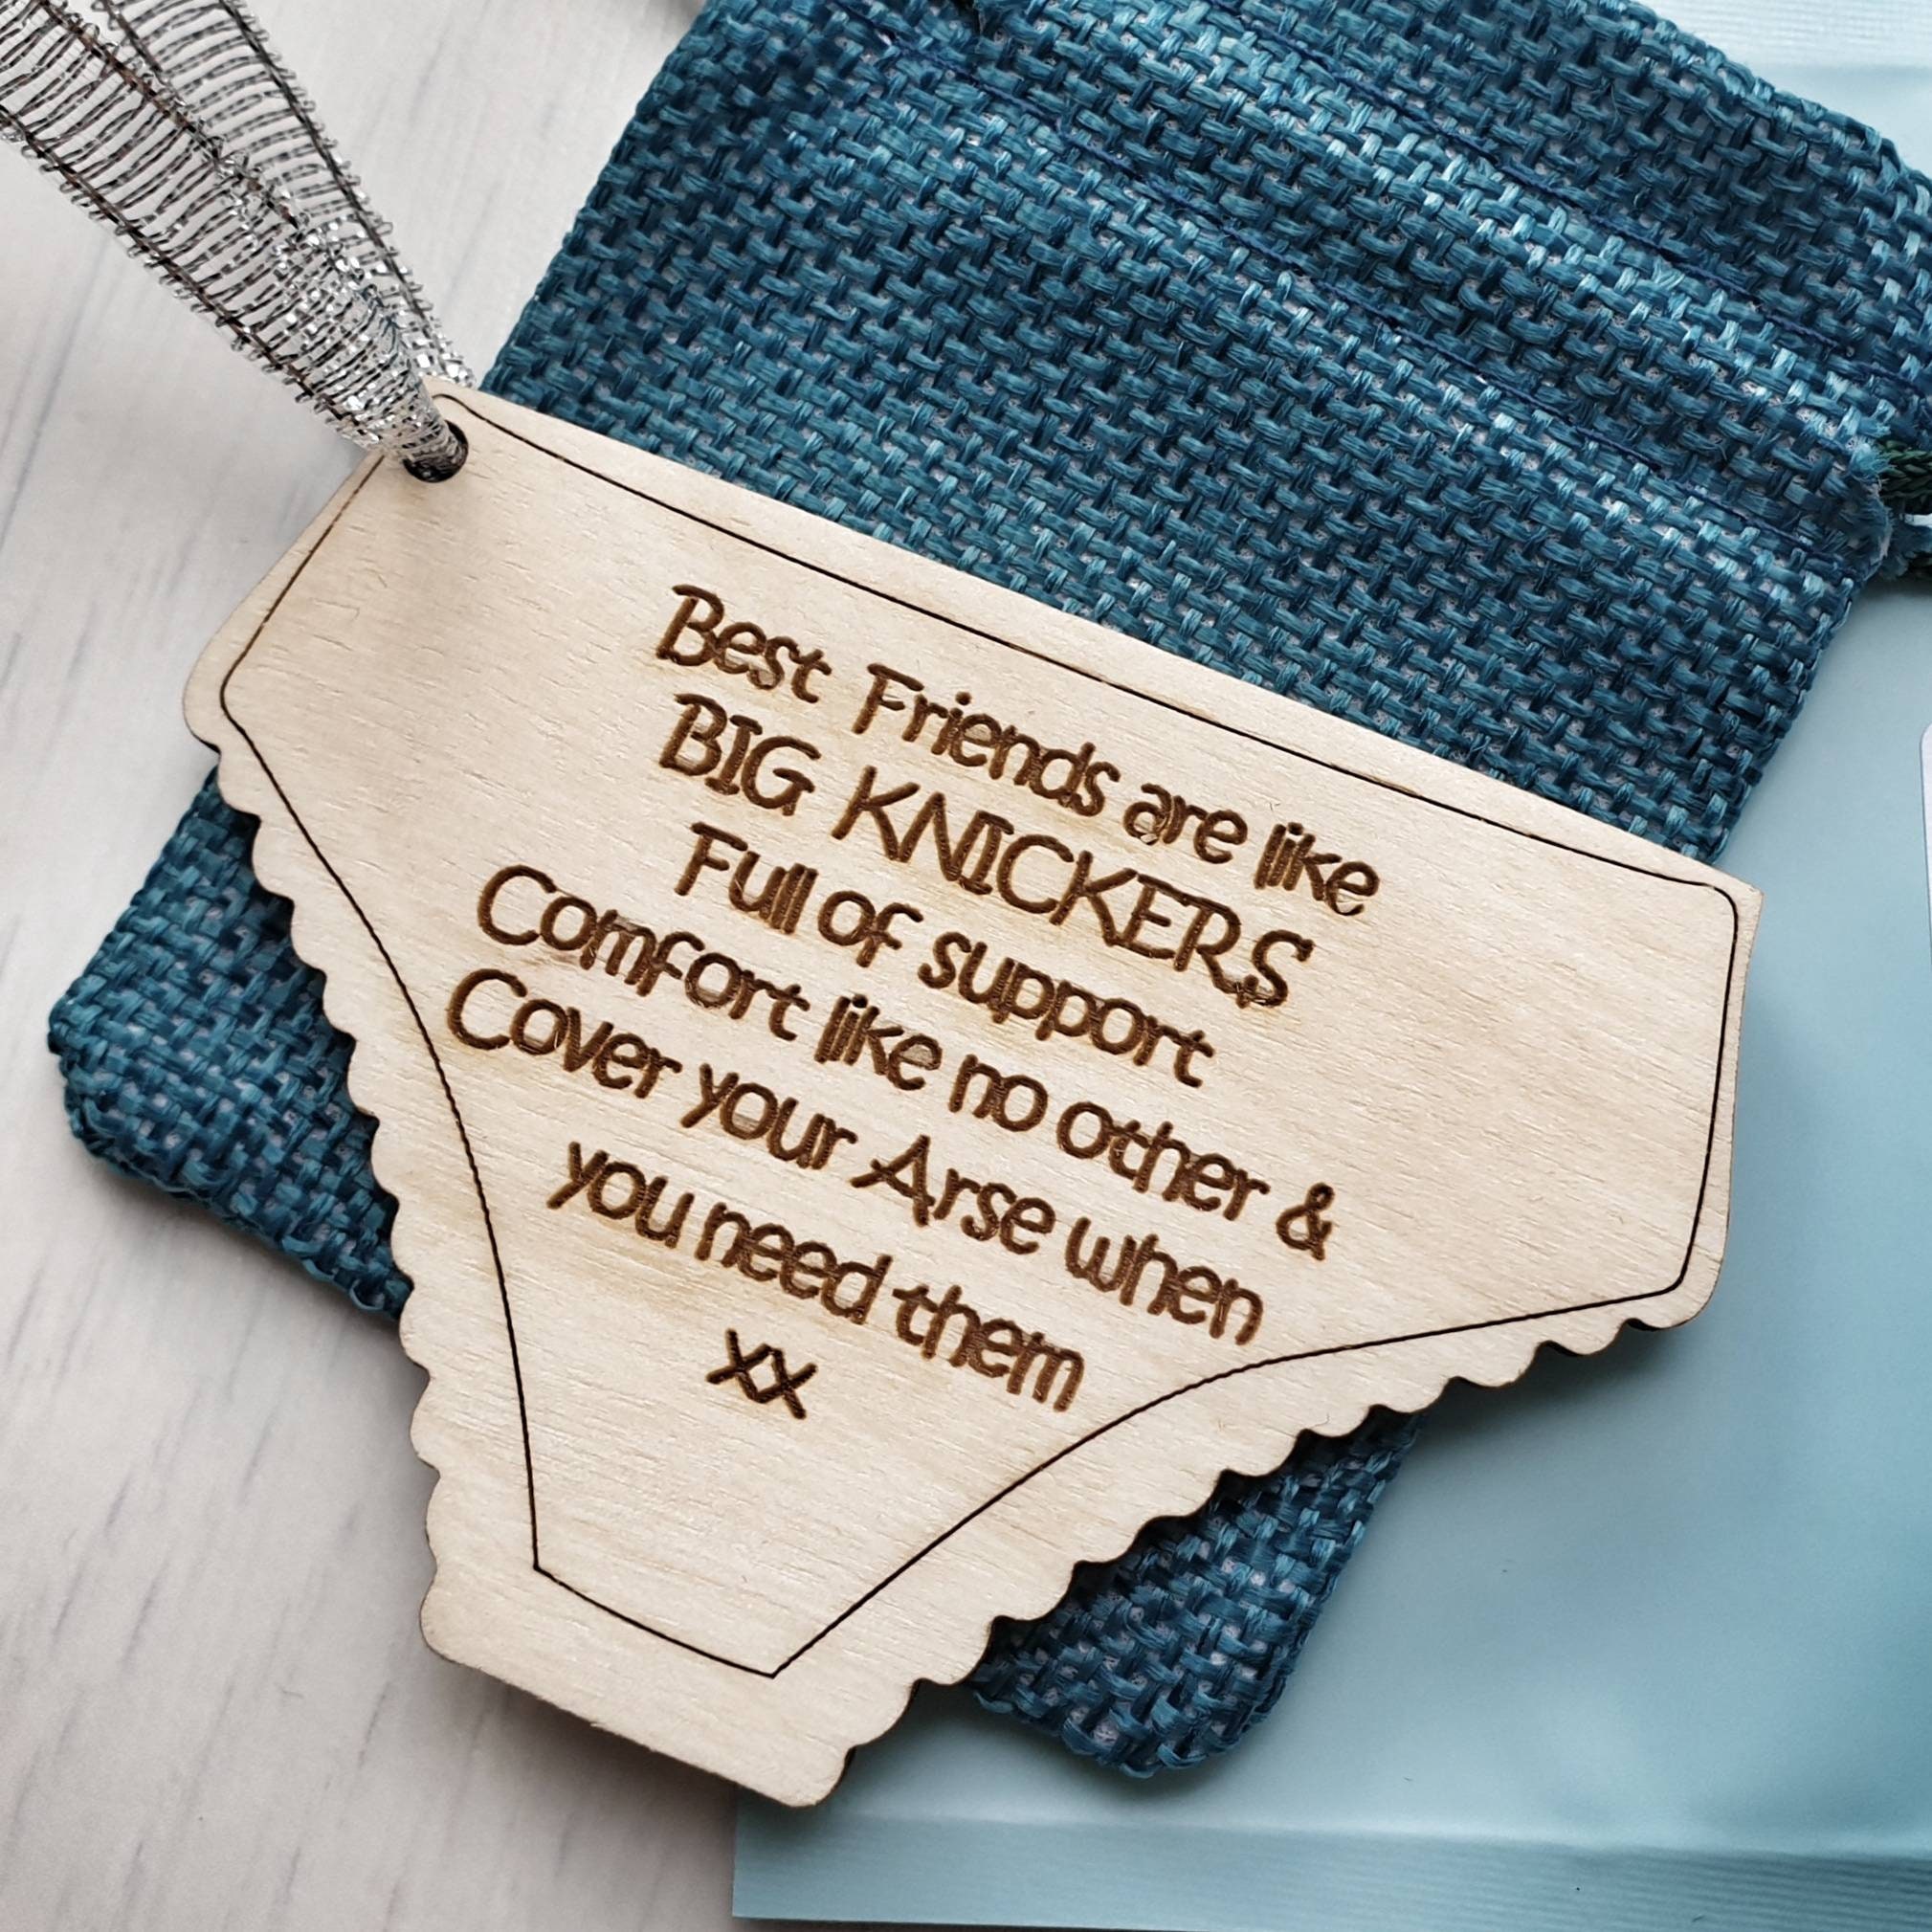 Best Friends Are Like Big Knickers: Funny Gift For Best Friend